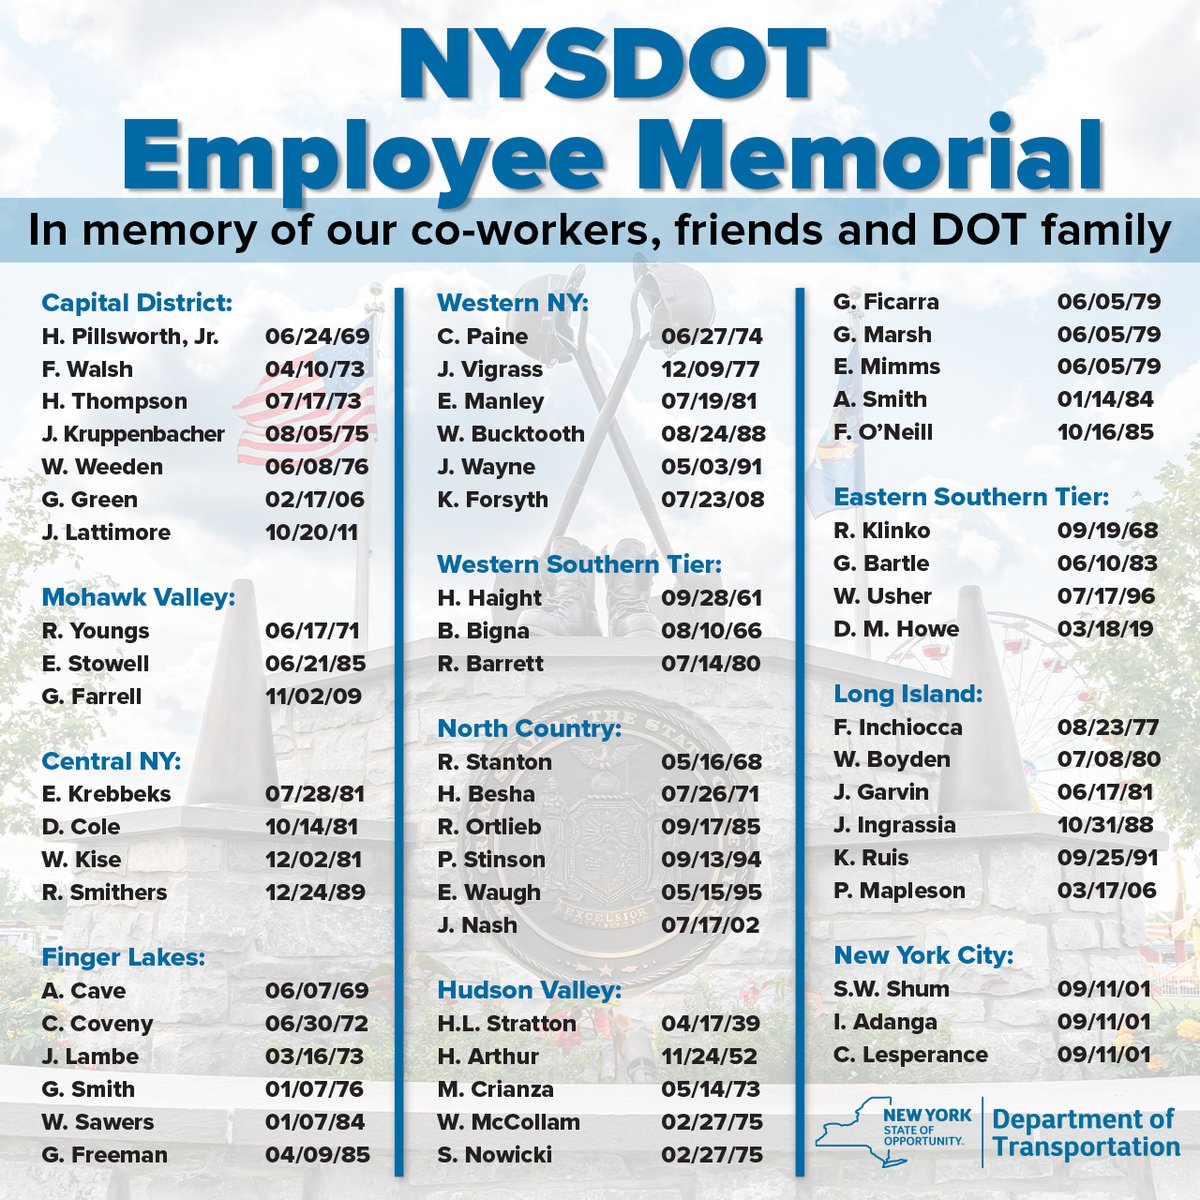 Today at 11 a.m., we gather for the Workers Memorial Ceremony on the NYS Fairgrounds in Syracuse to pay tribute to the 58 NYSDOT lives lost while on the job. Their legacy reminds us of the importance of safety in our work zones. #WorkZoneSafety